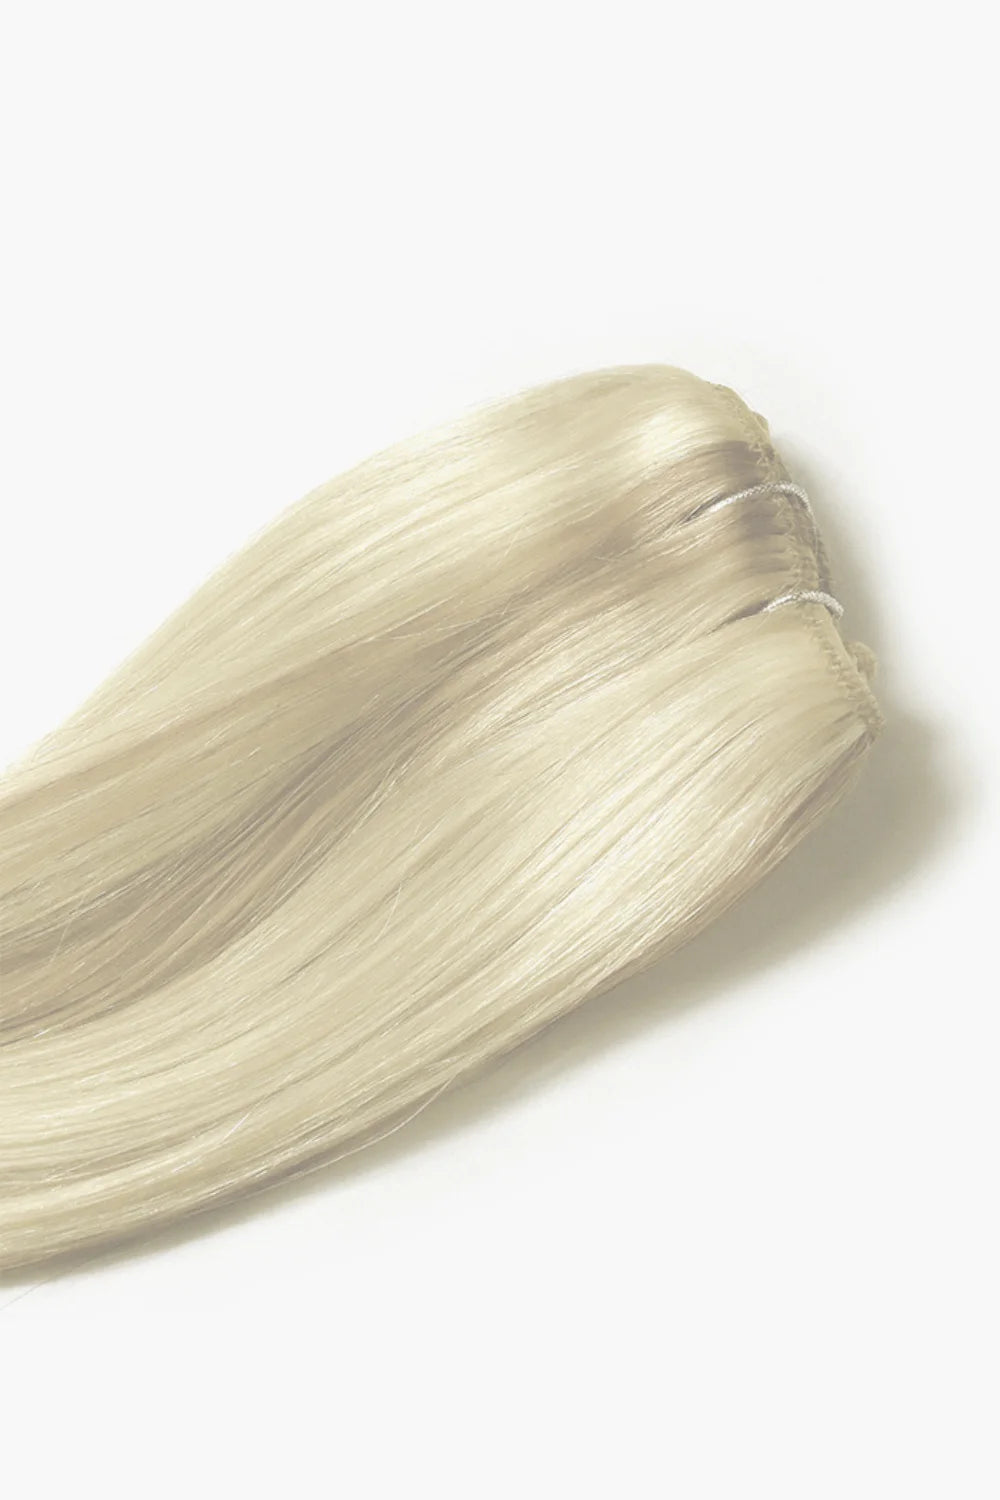 platinum blondeme one piece top up hair extension cropped